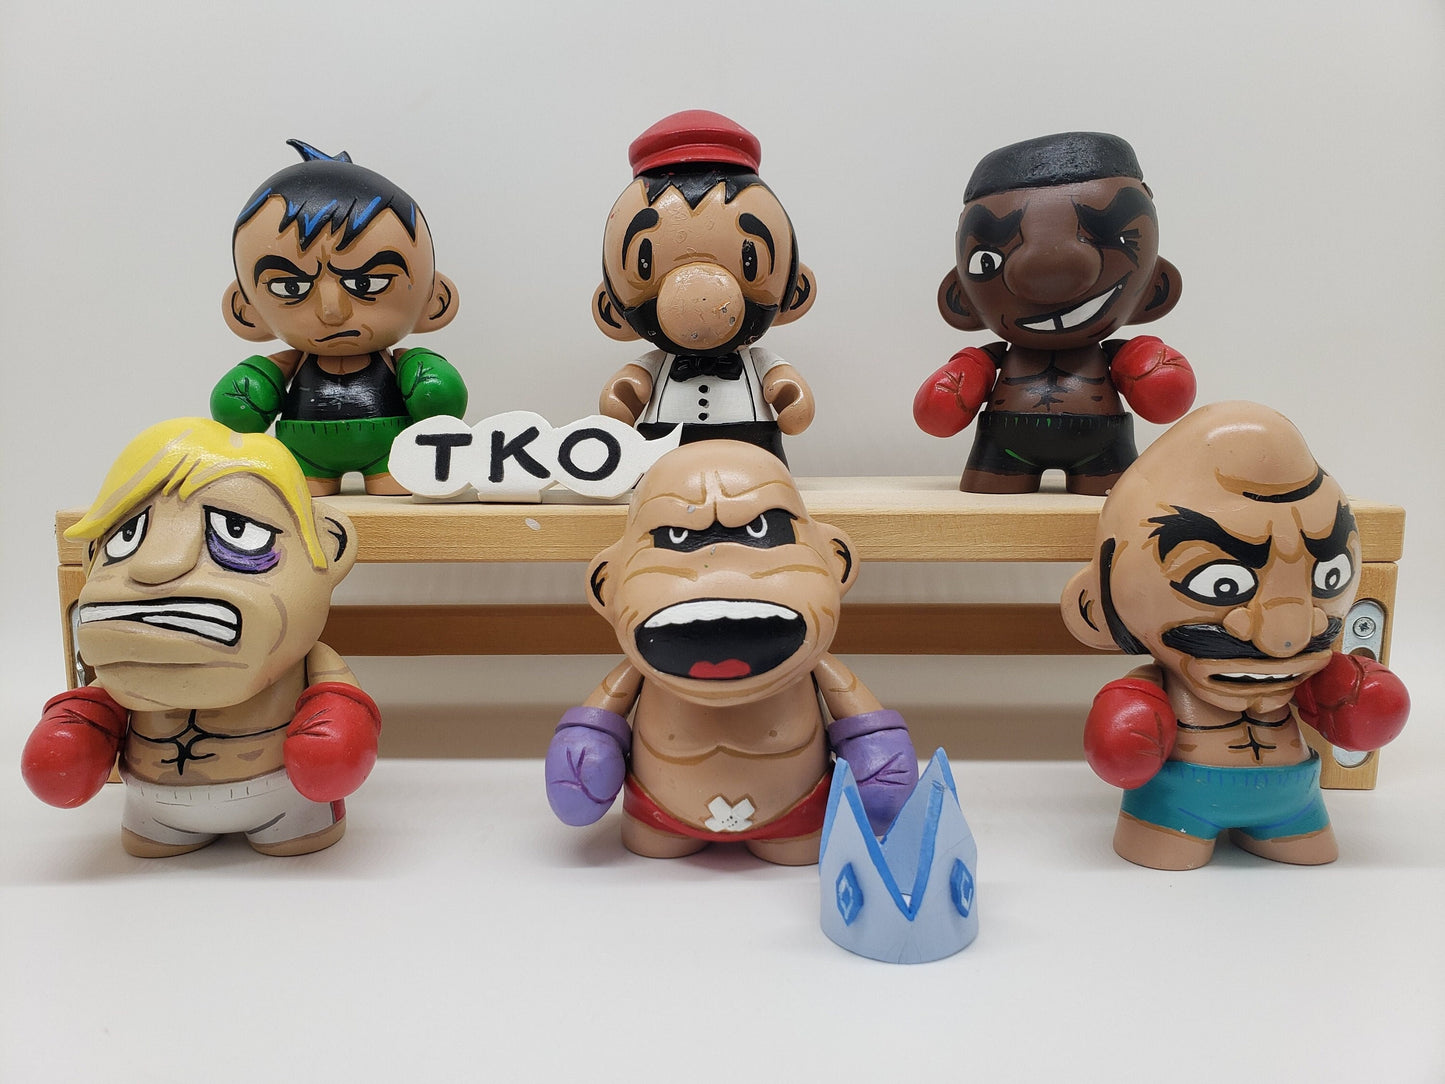 Mike Tyson's Punch-Out!! Rare Collectible Designer Art Vinyl Toy Figure Custom Kidrobot Perfect Birthday Gift